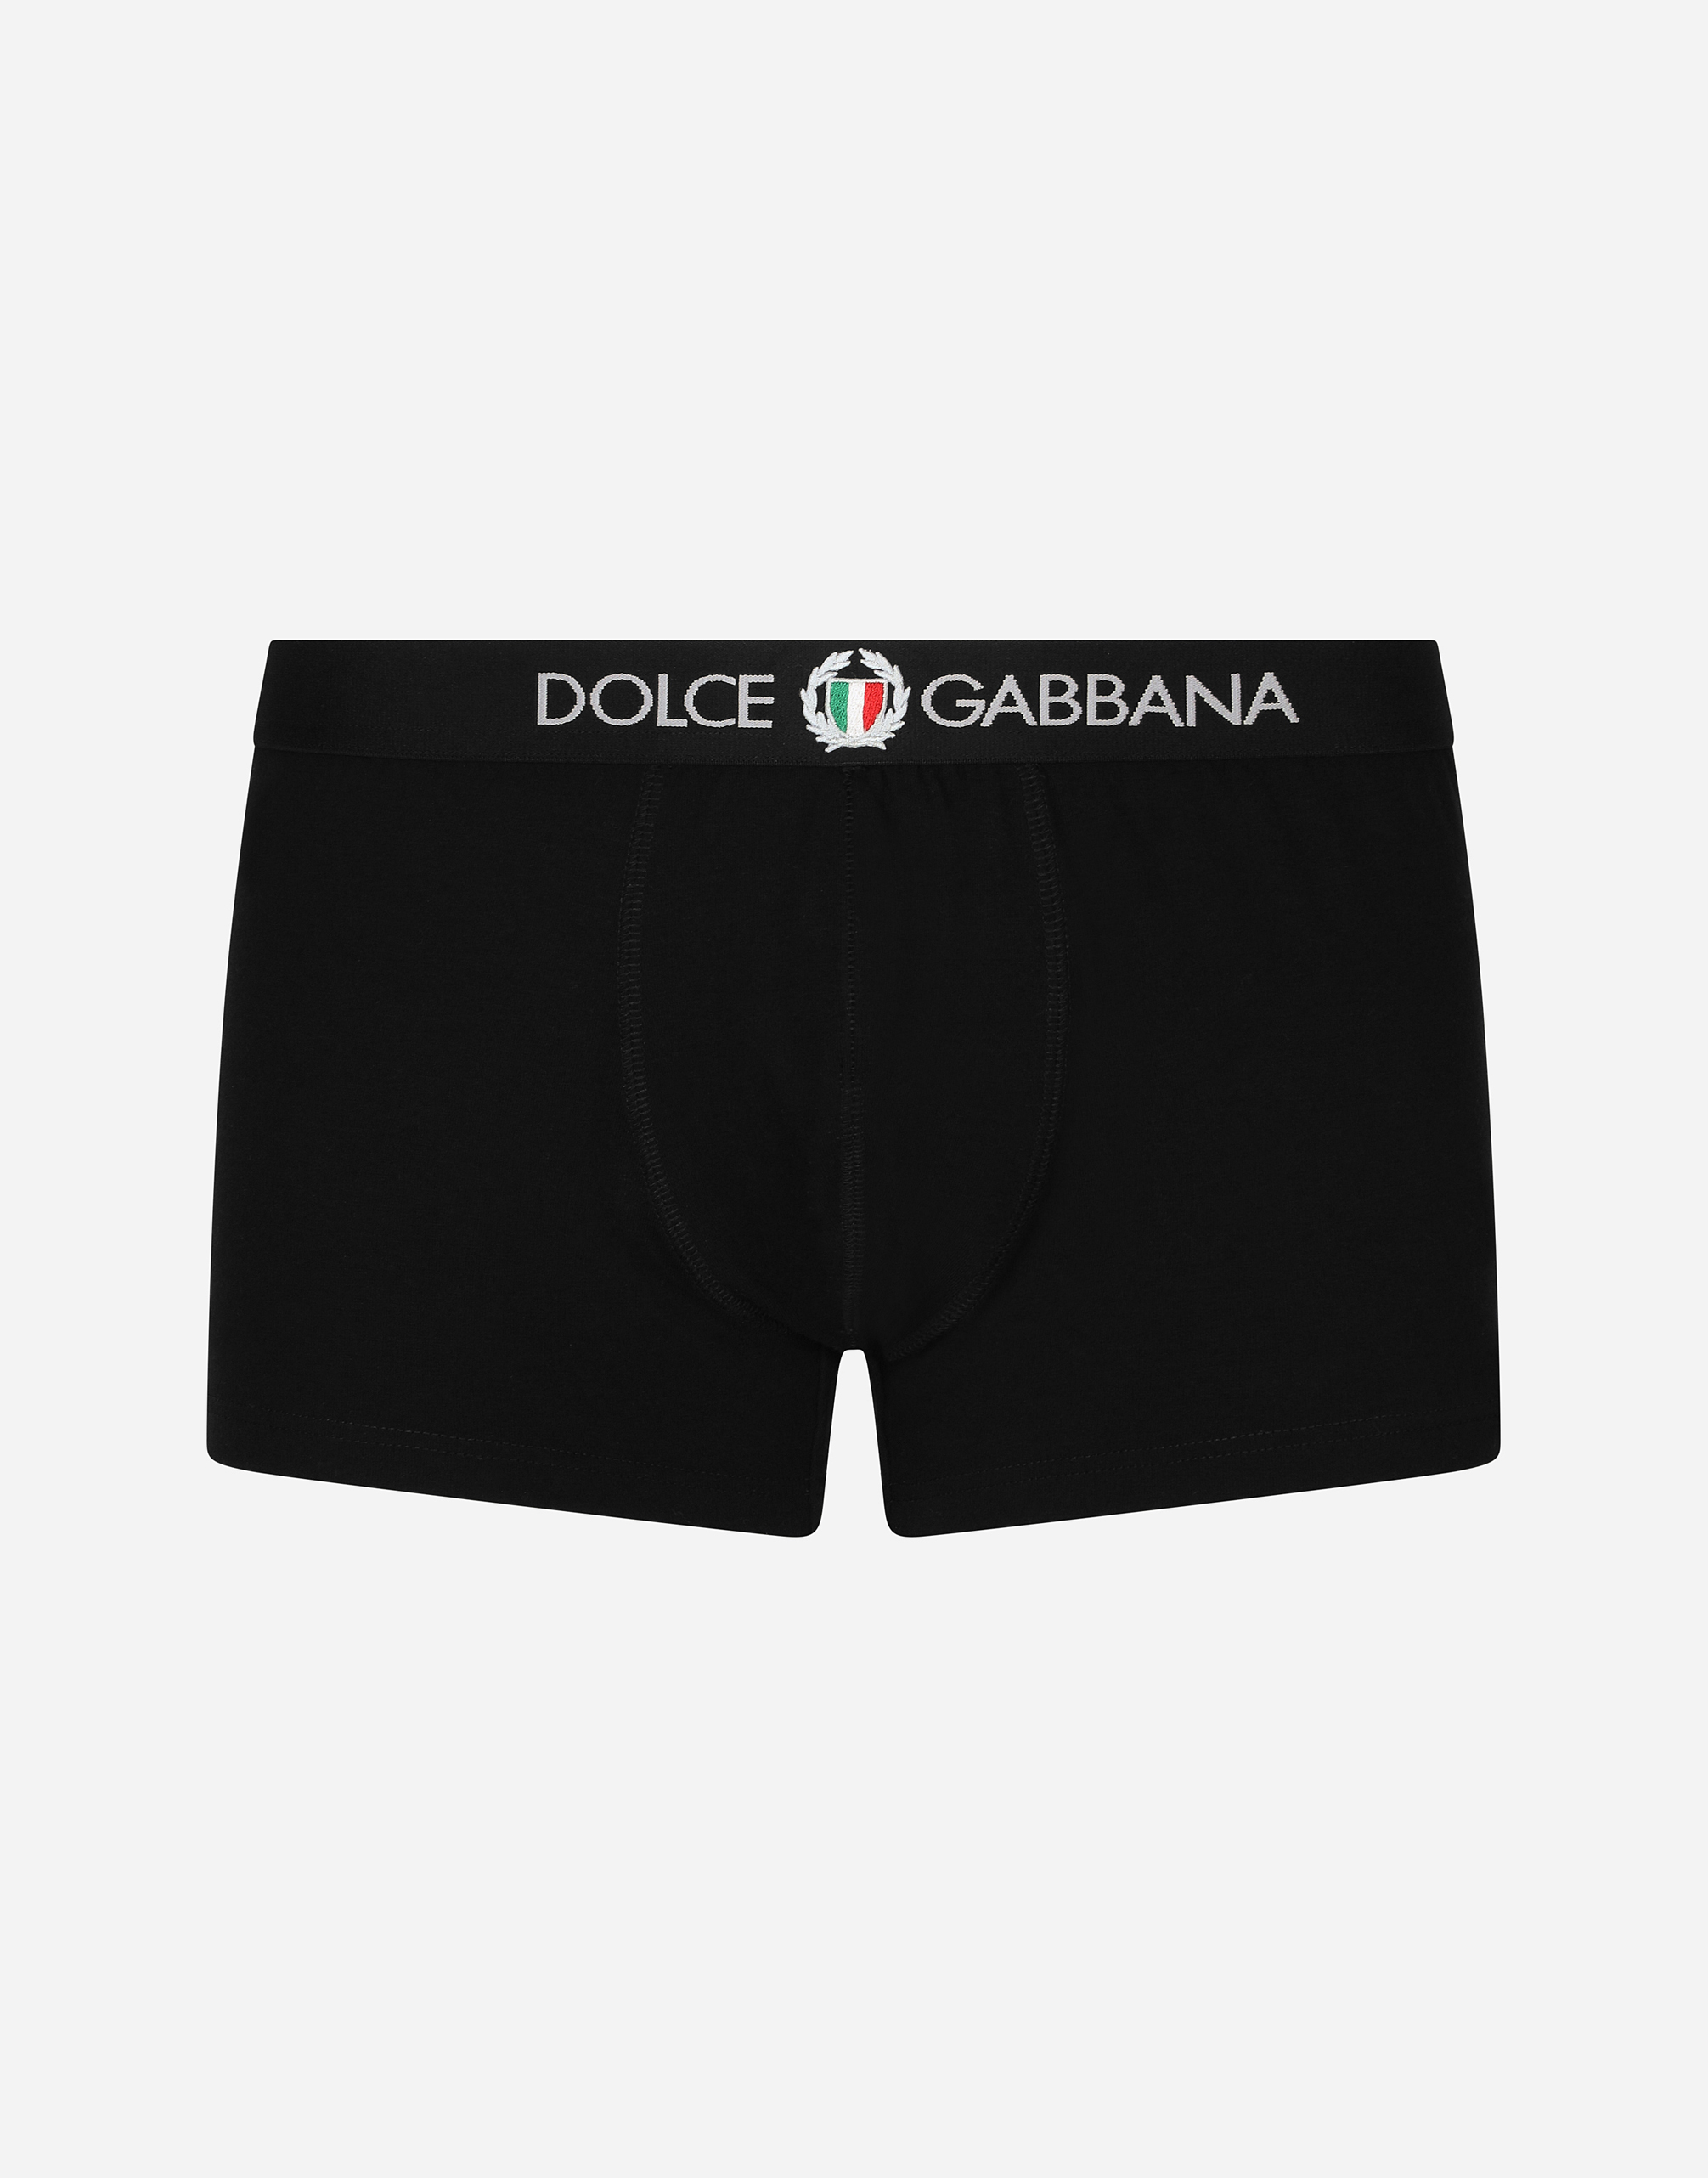 Boxers in stretch cotton in BLACK for Men